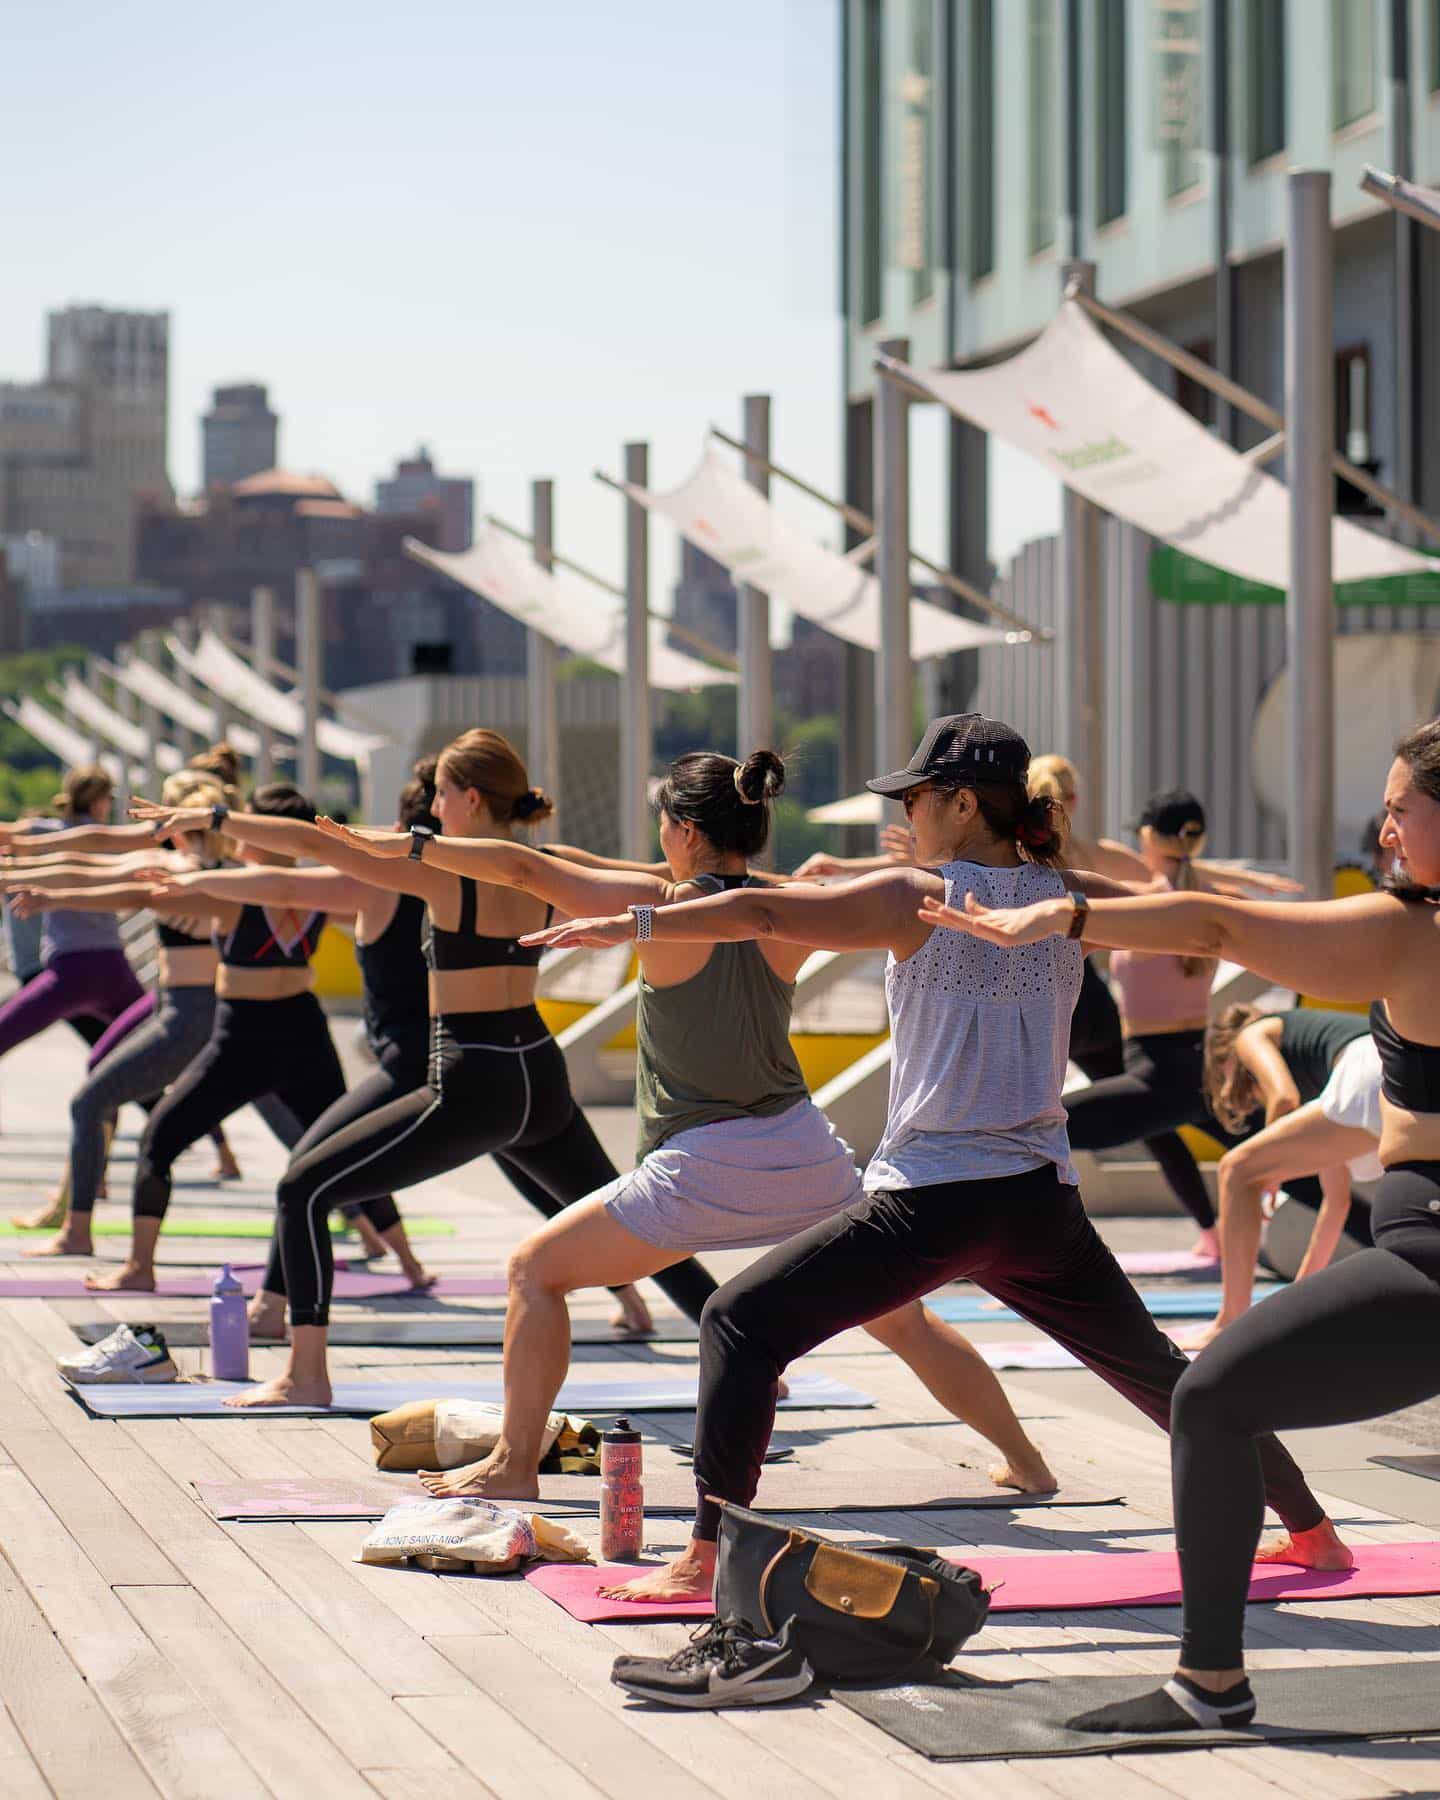 Get inspired. Get outside. Stay moving. is back with its summer lineup. The workout crew this season ↴

Tuesdays | Boxing-inspired HIIT
 6:30pm
 Heineken Riverdeck
 Taught by @hiitthedeck

Saturdays | Power Yoga
 10:30am
 Seaport Square
 Taught by @lyonsdenpy

Presented by @nyphospital
RSVP ➤ link in bio.